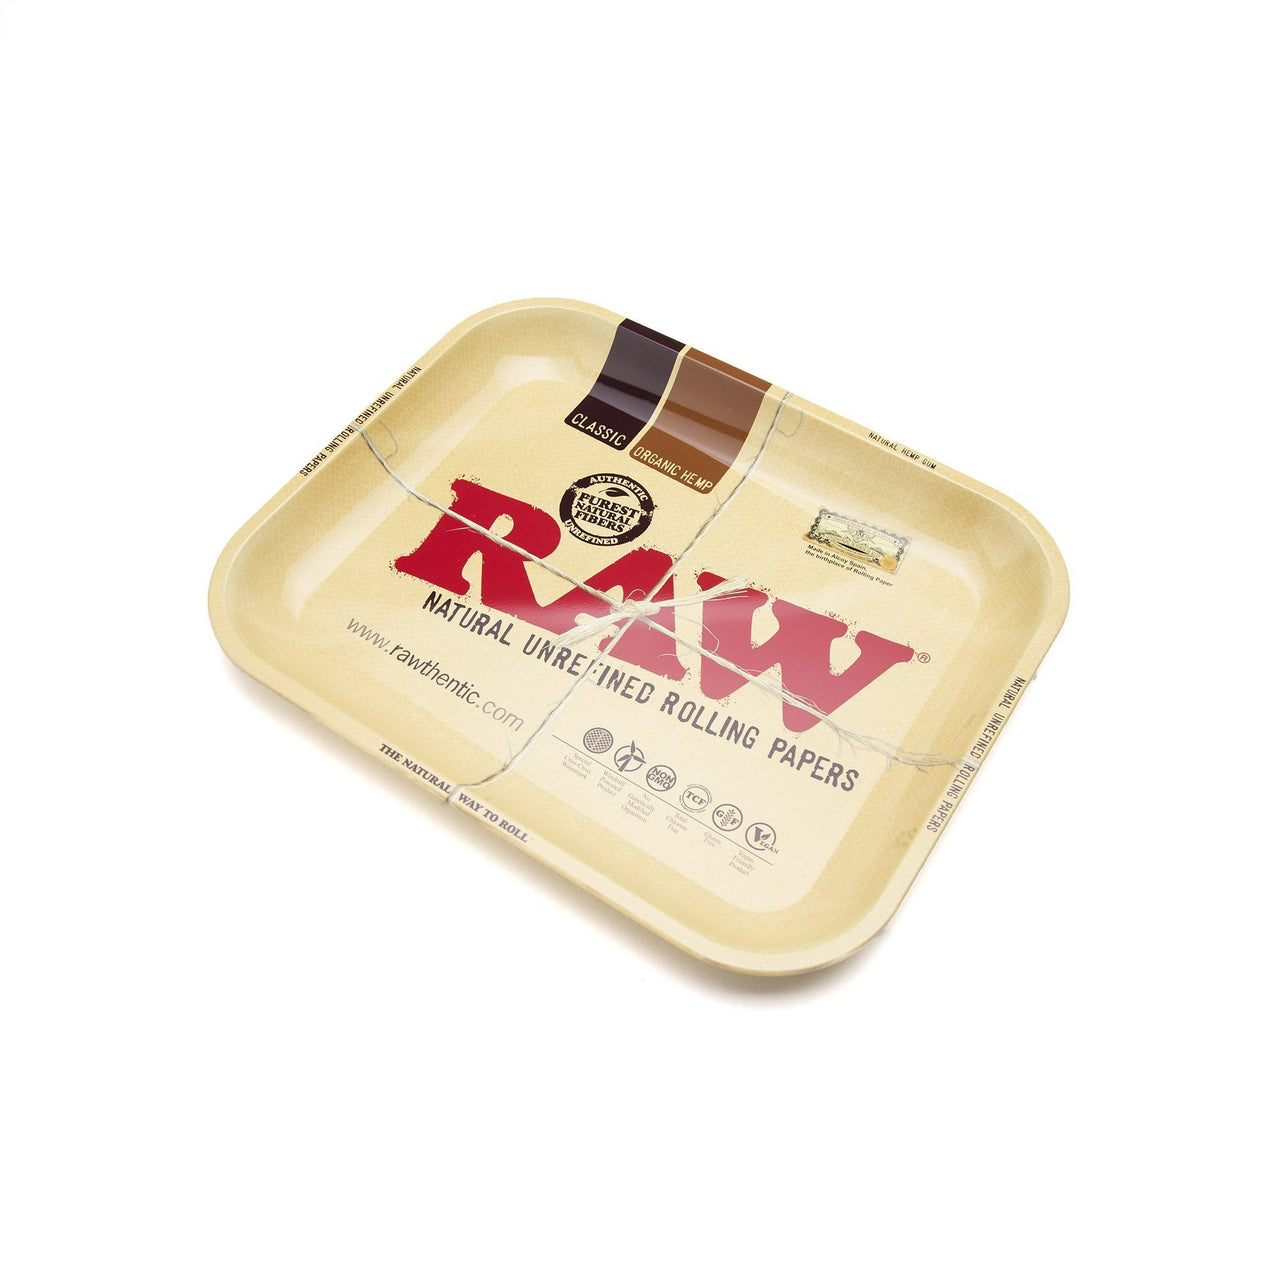 RAW Rolling Tray - Large - 420 Science - The most trusted online smoke shop.